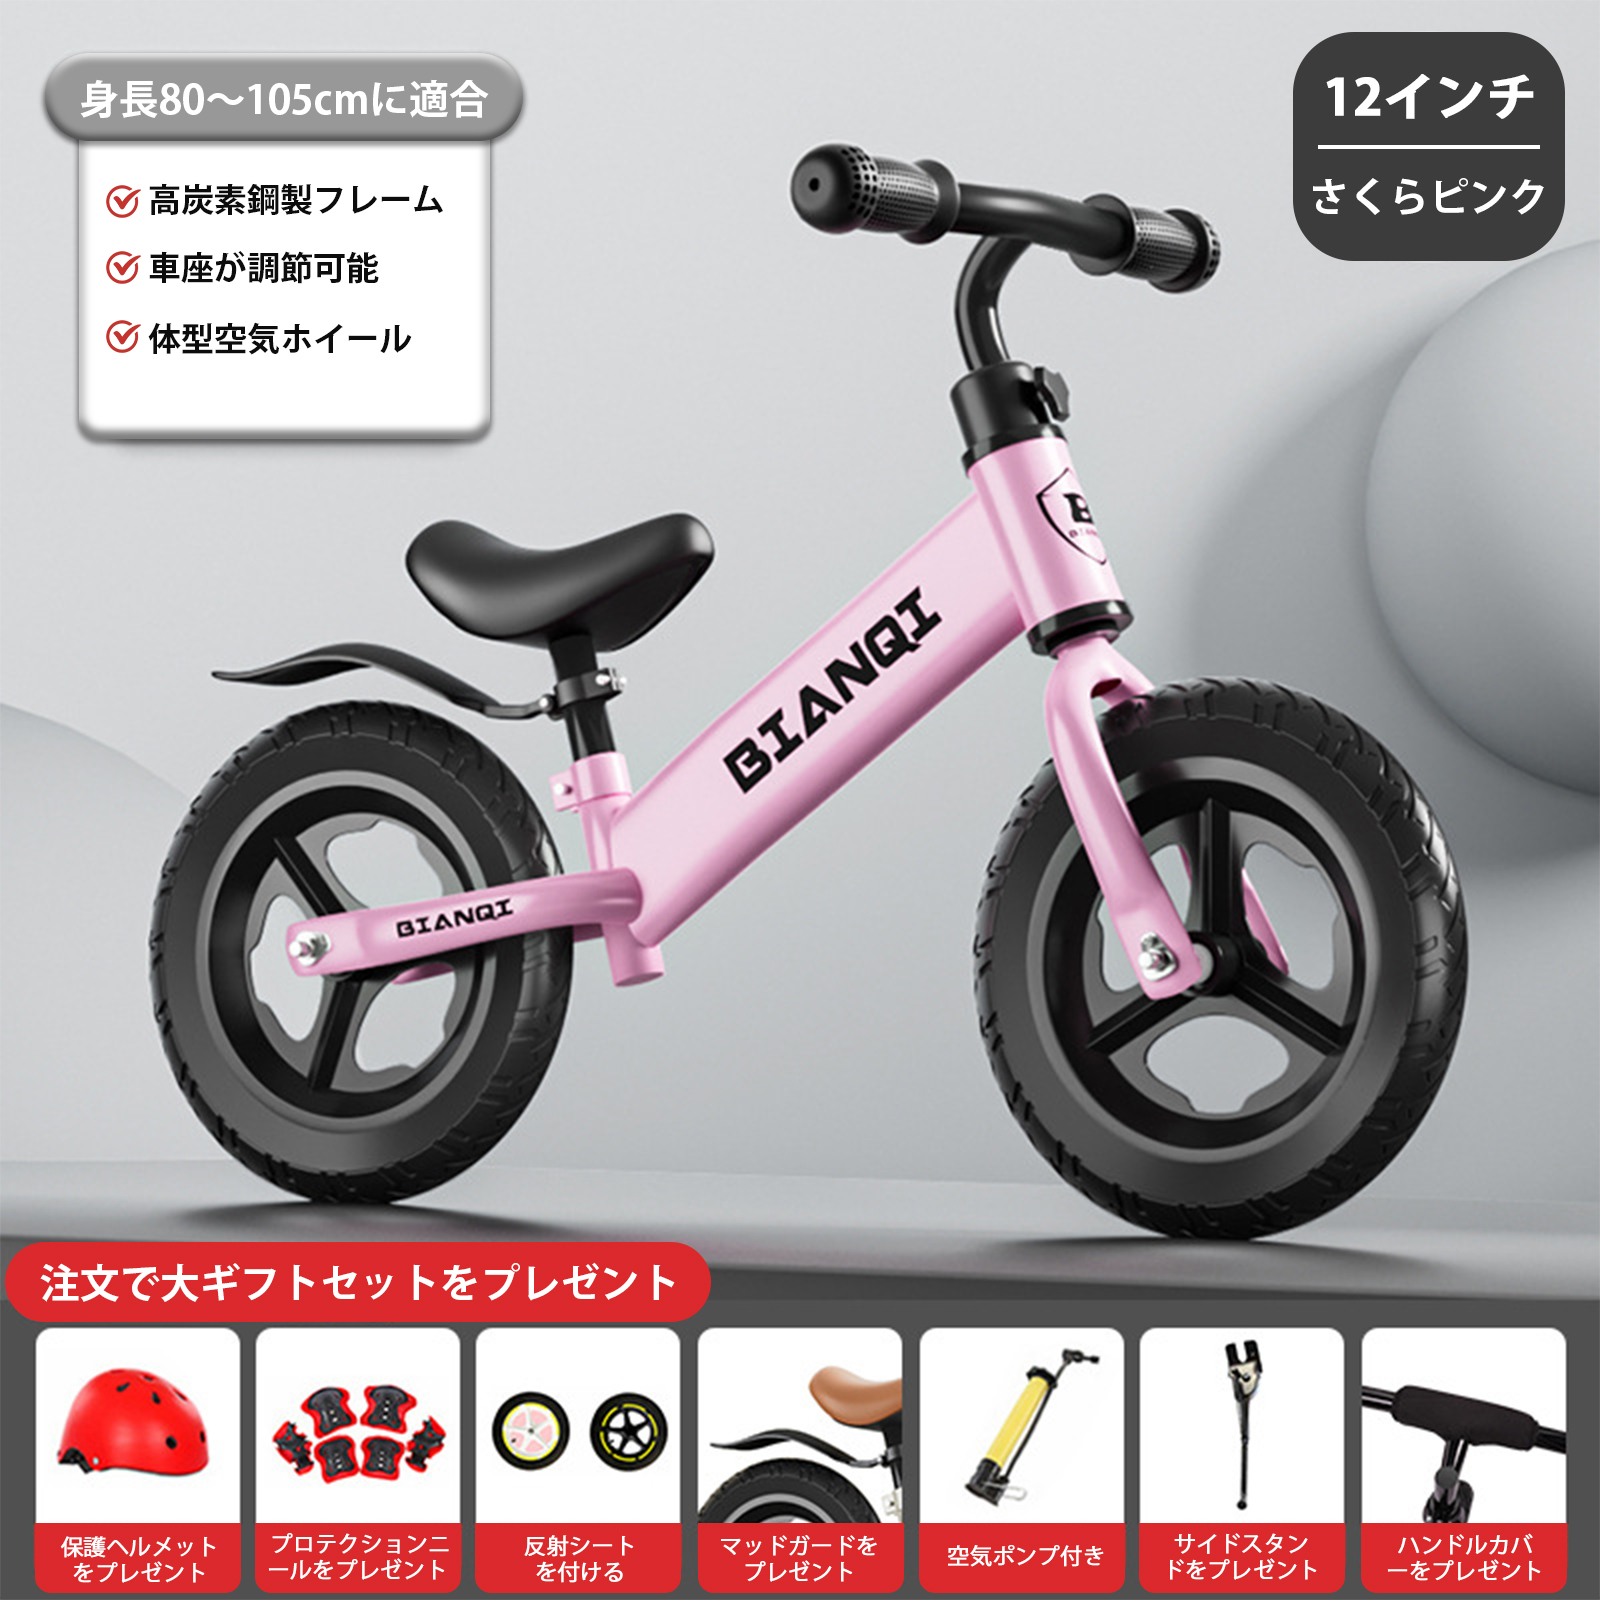 K12 Cherry blossom pink integrated inflatable wheel